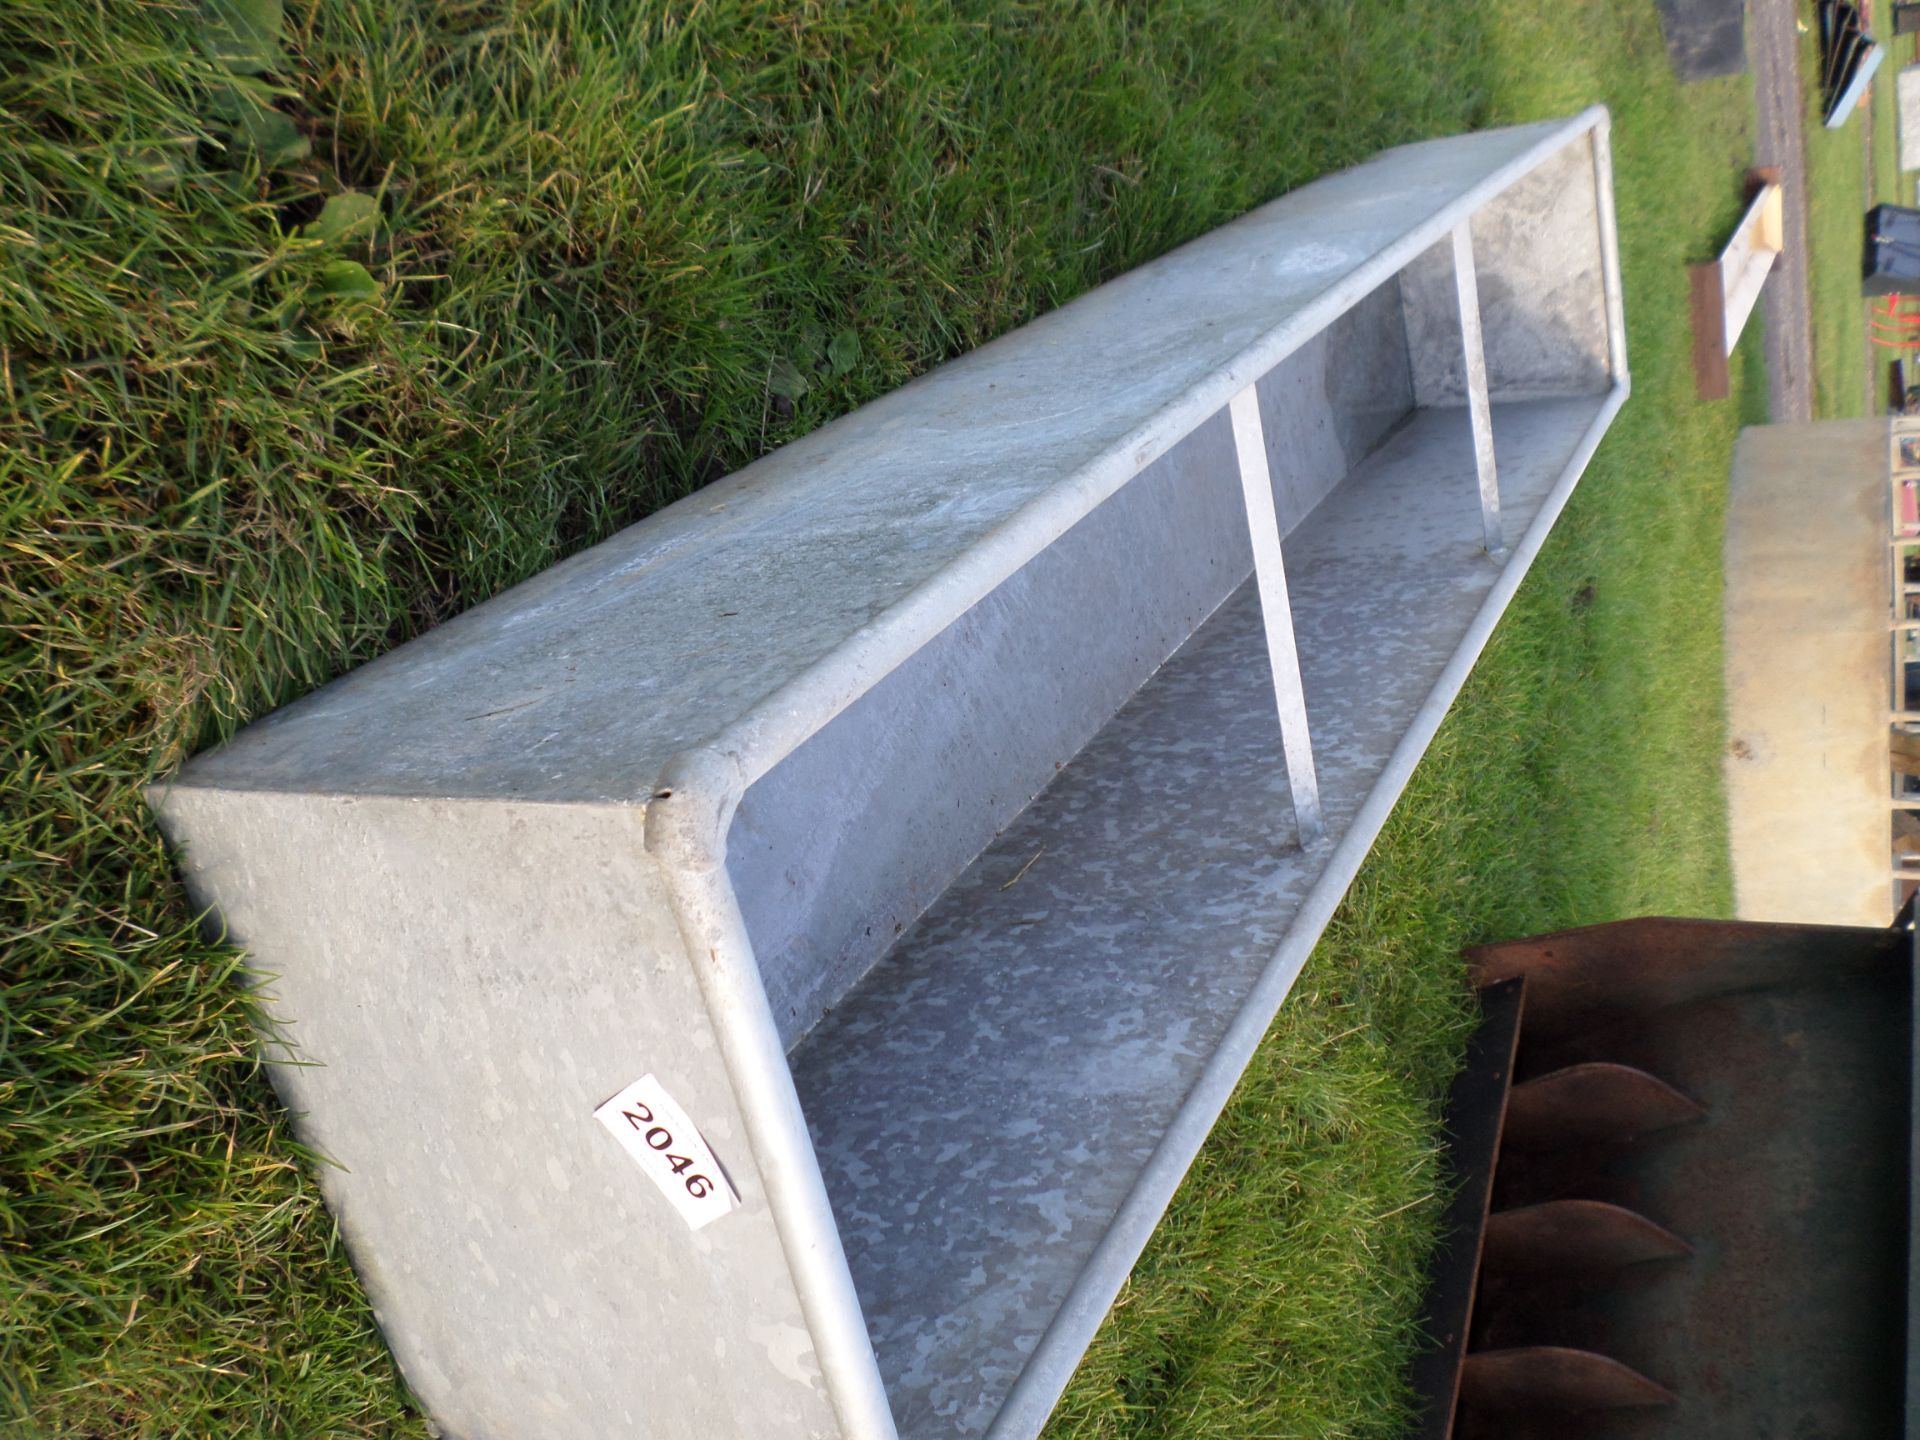 New old stock 8ft water troughs - Image 2 of 2